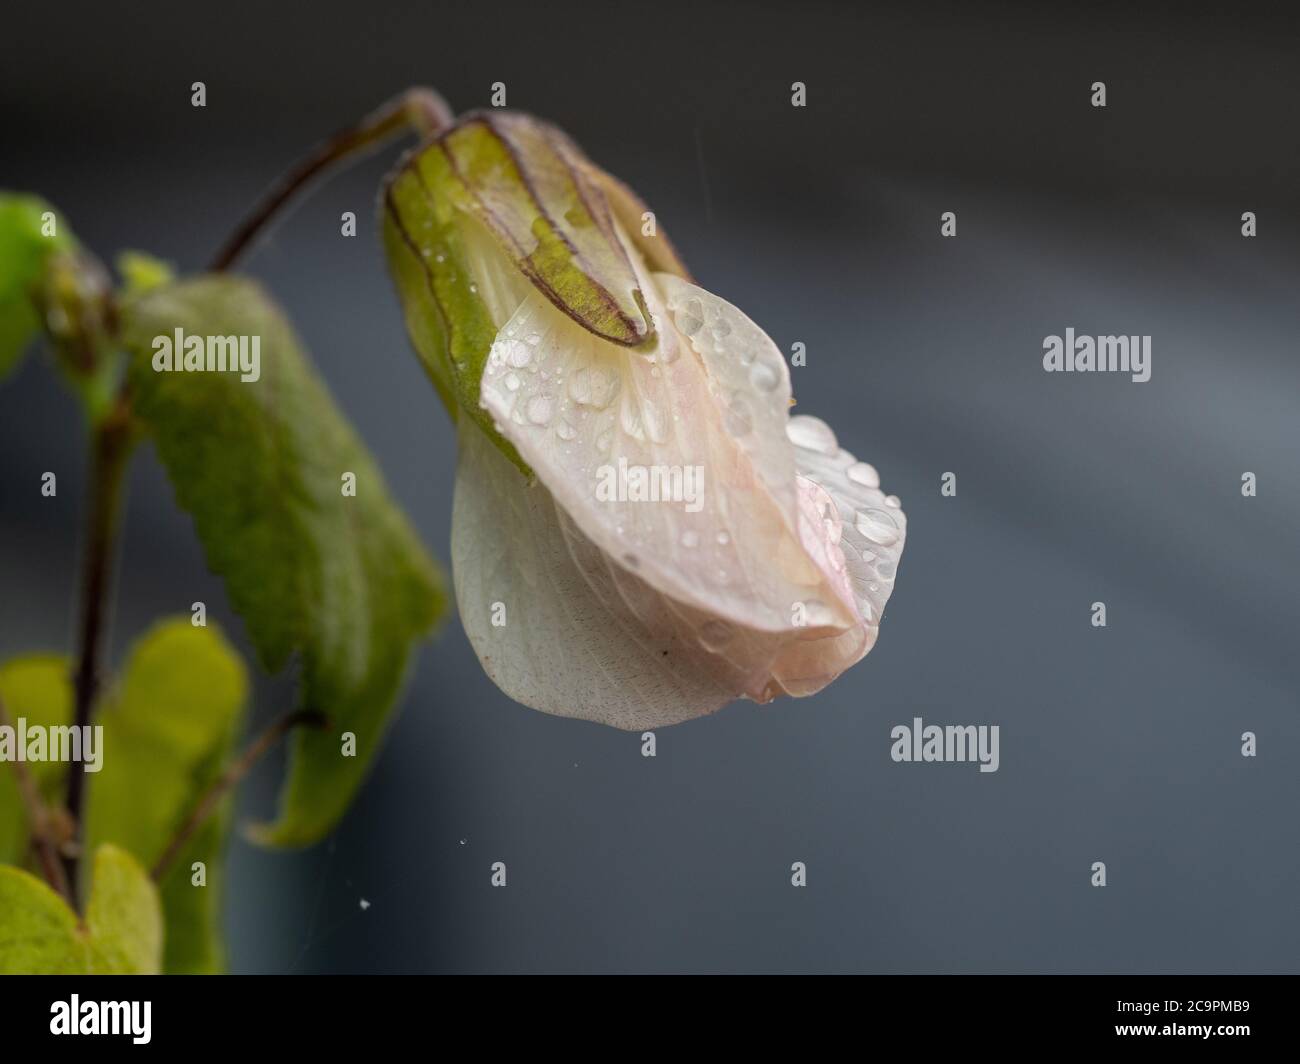 Flowers. Pale cream with a touch of pink or orange coloured Chinese Lantern plant flower bud, petals wet from rain, on a blurred blue grey background Stock Photo